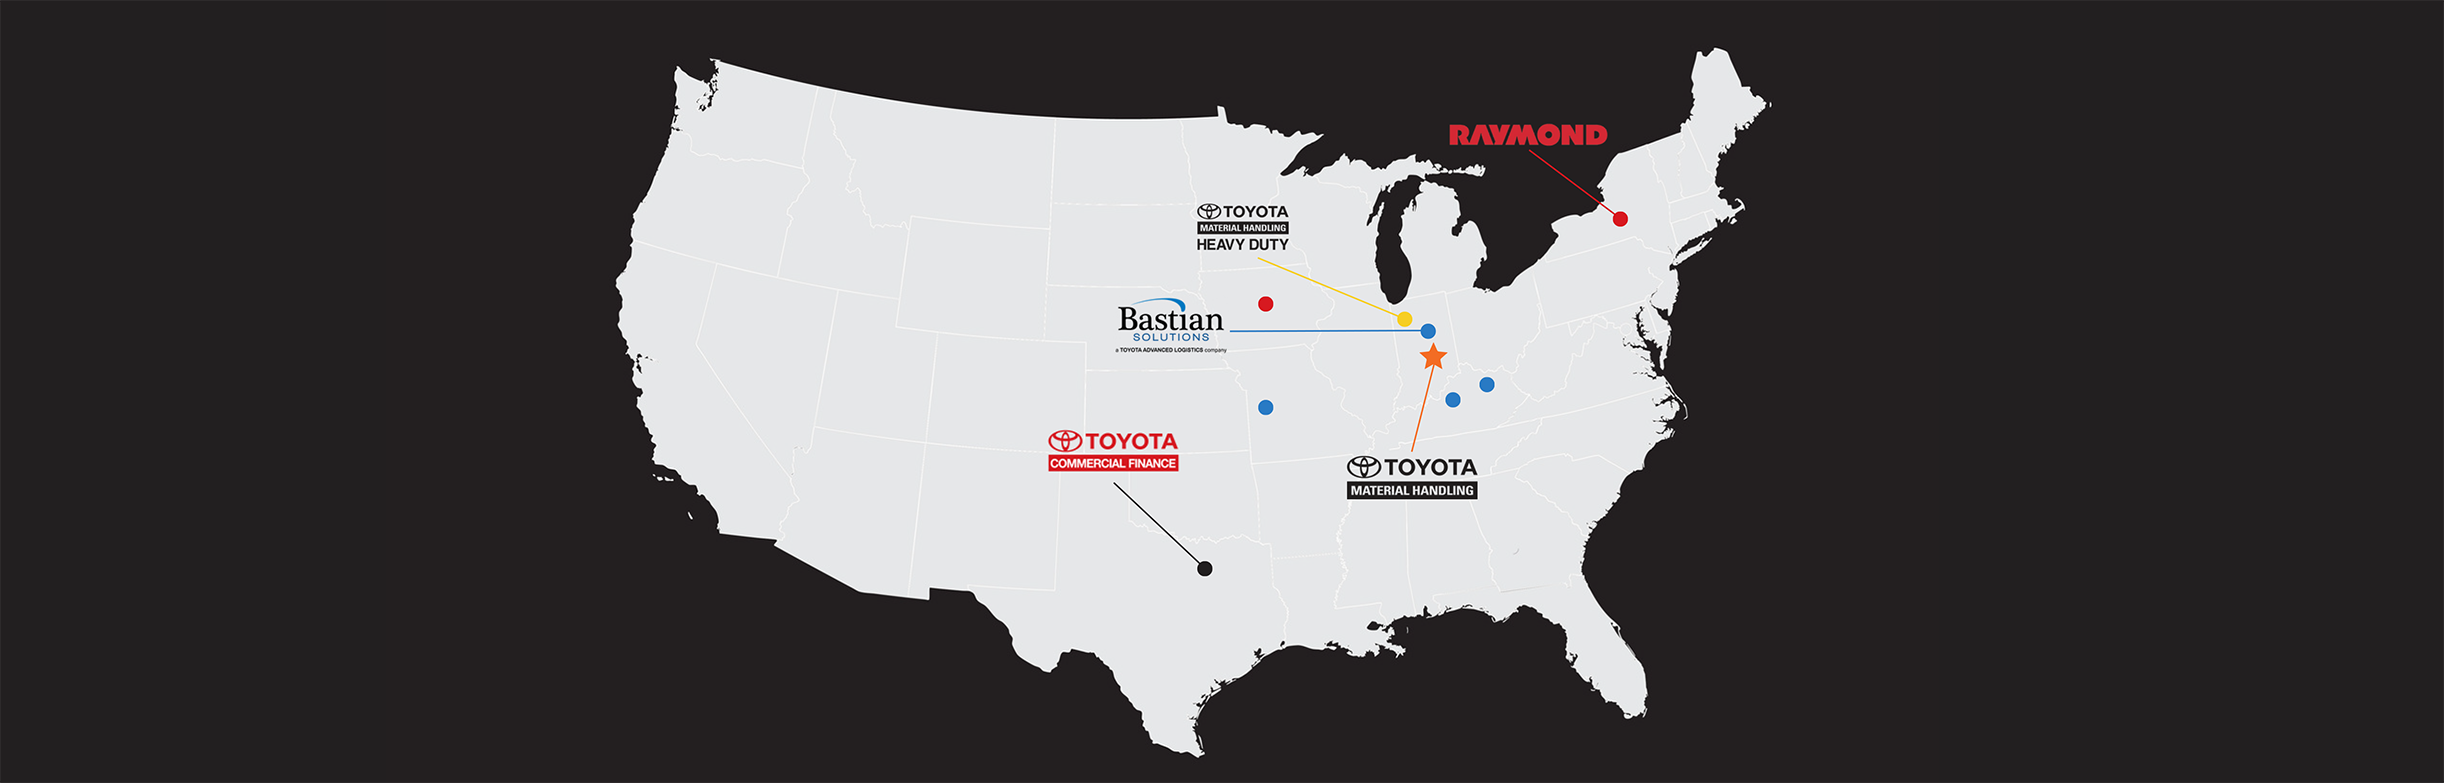 united states map with toyota sister companies marked based on their location